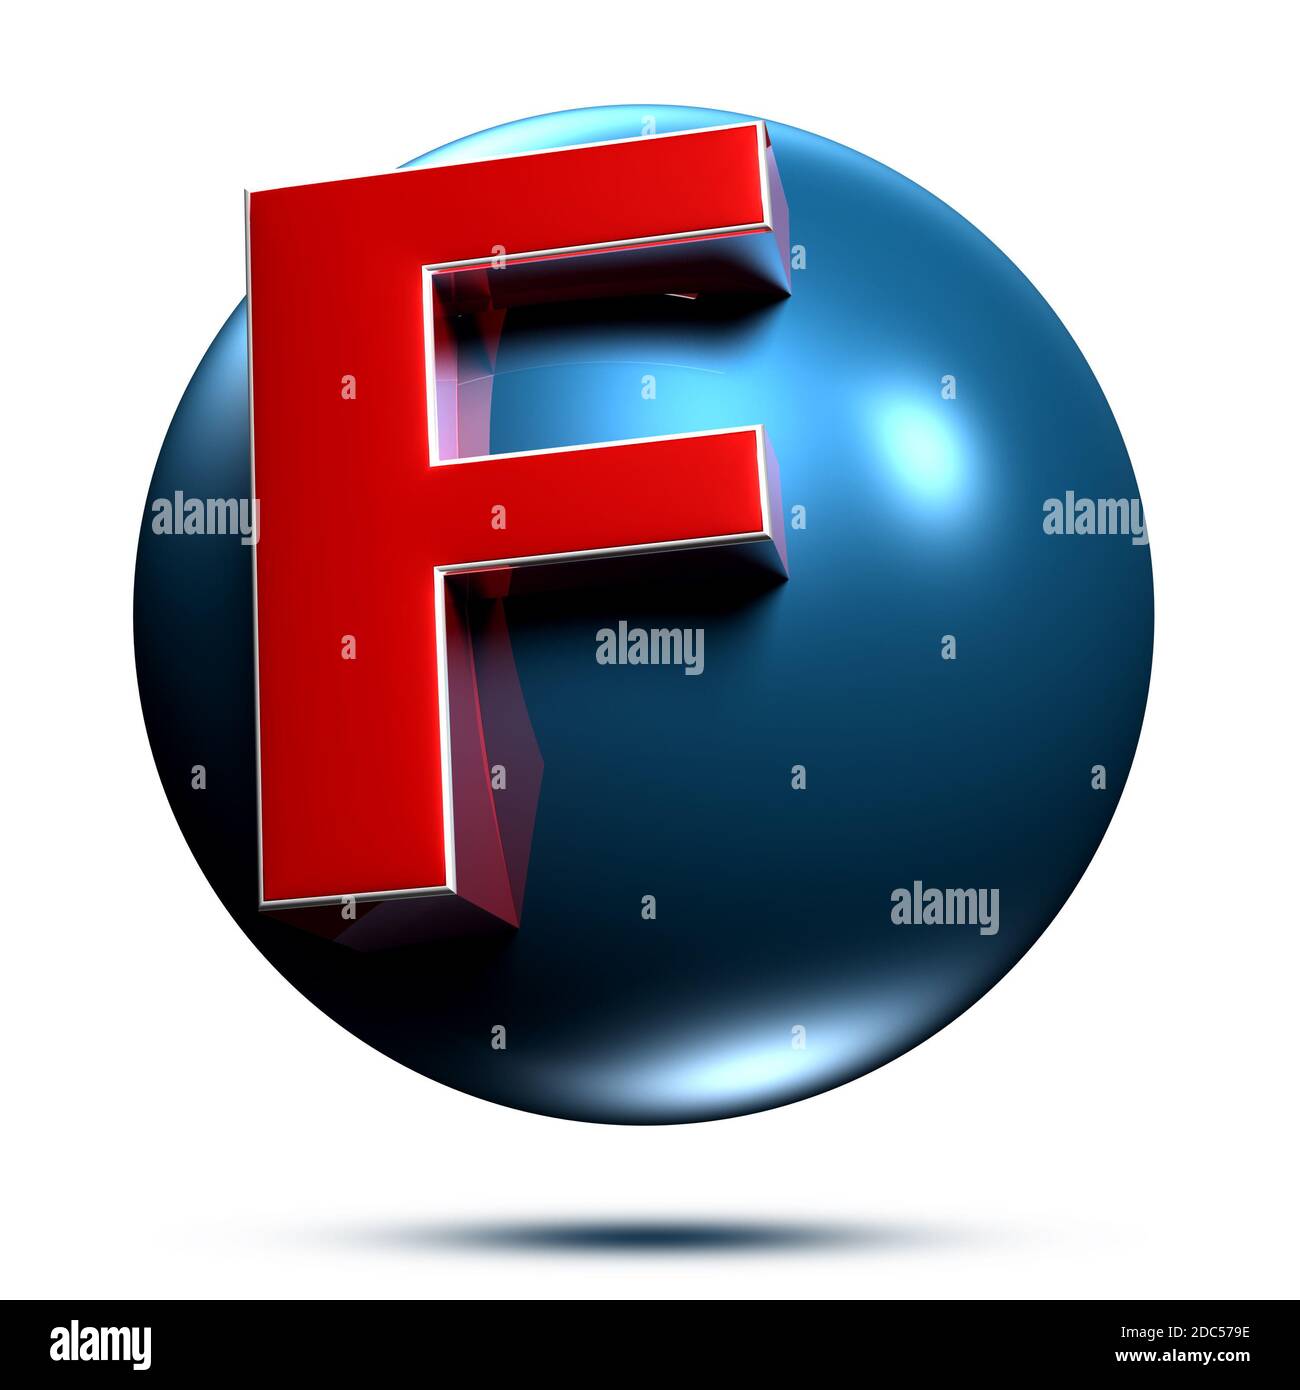 F logo isolated on white background illustration 3D rendering with clipping path. Stock Photo